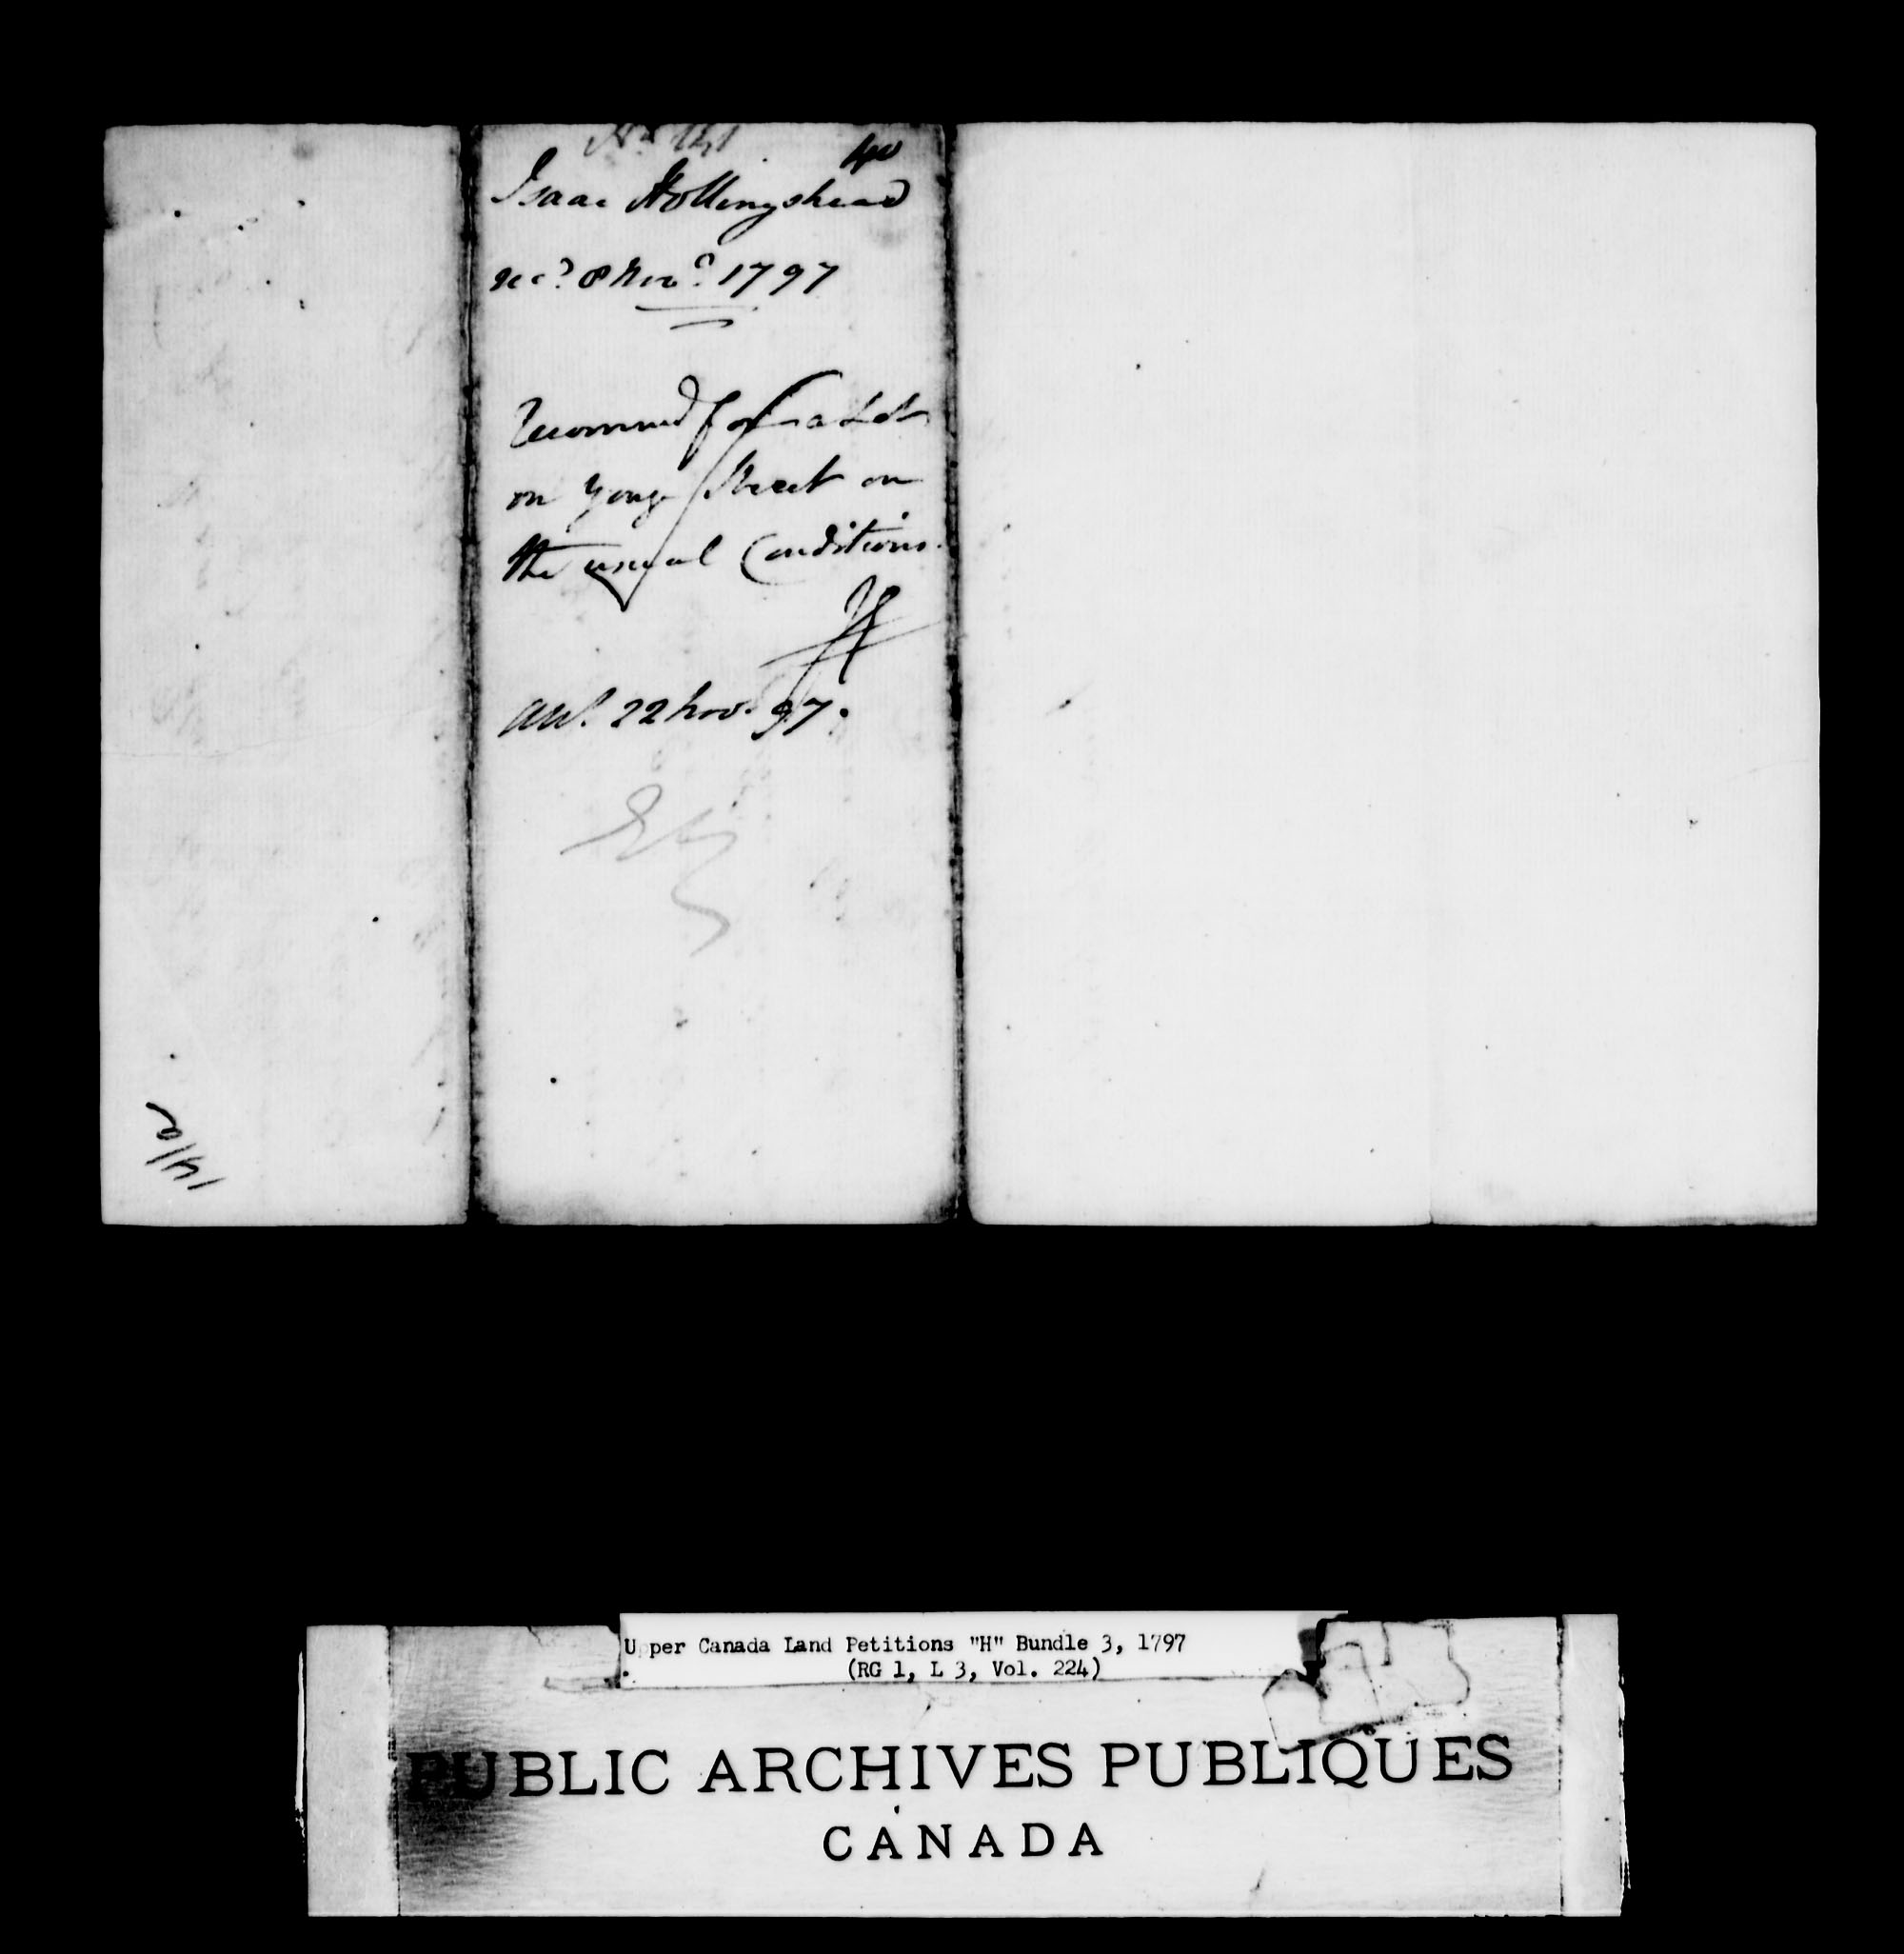 Title: Upper Canada Land Petitions (1763-1865) - Mikan Number: 205131 - Microform: c-2044